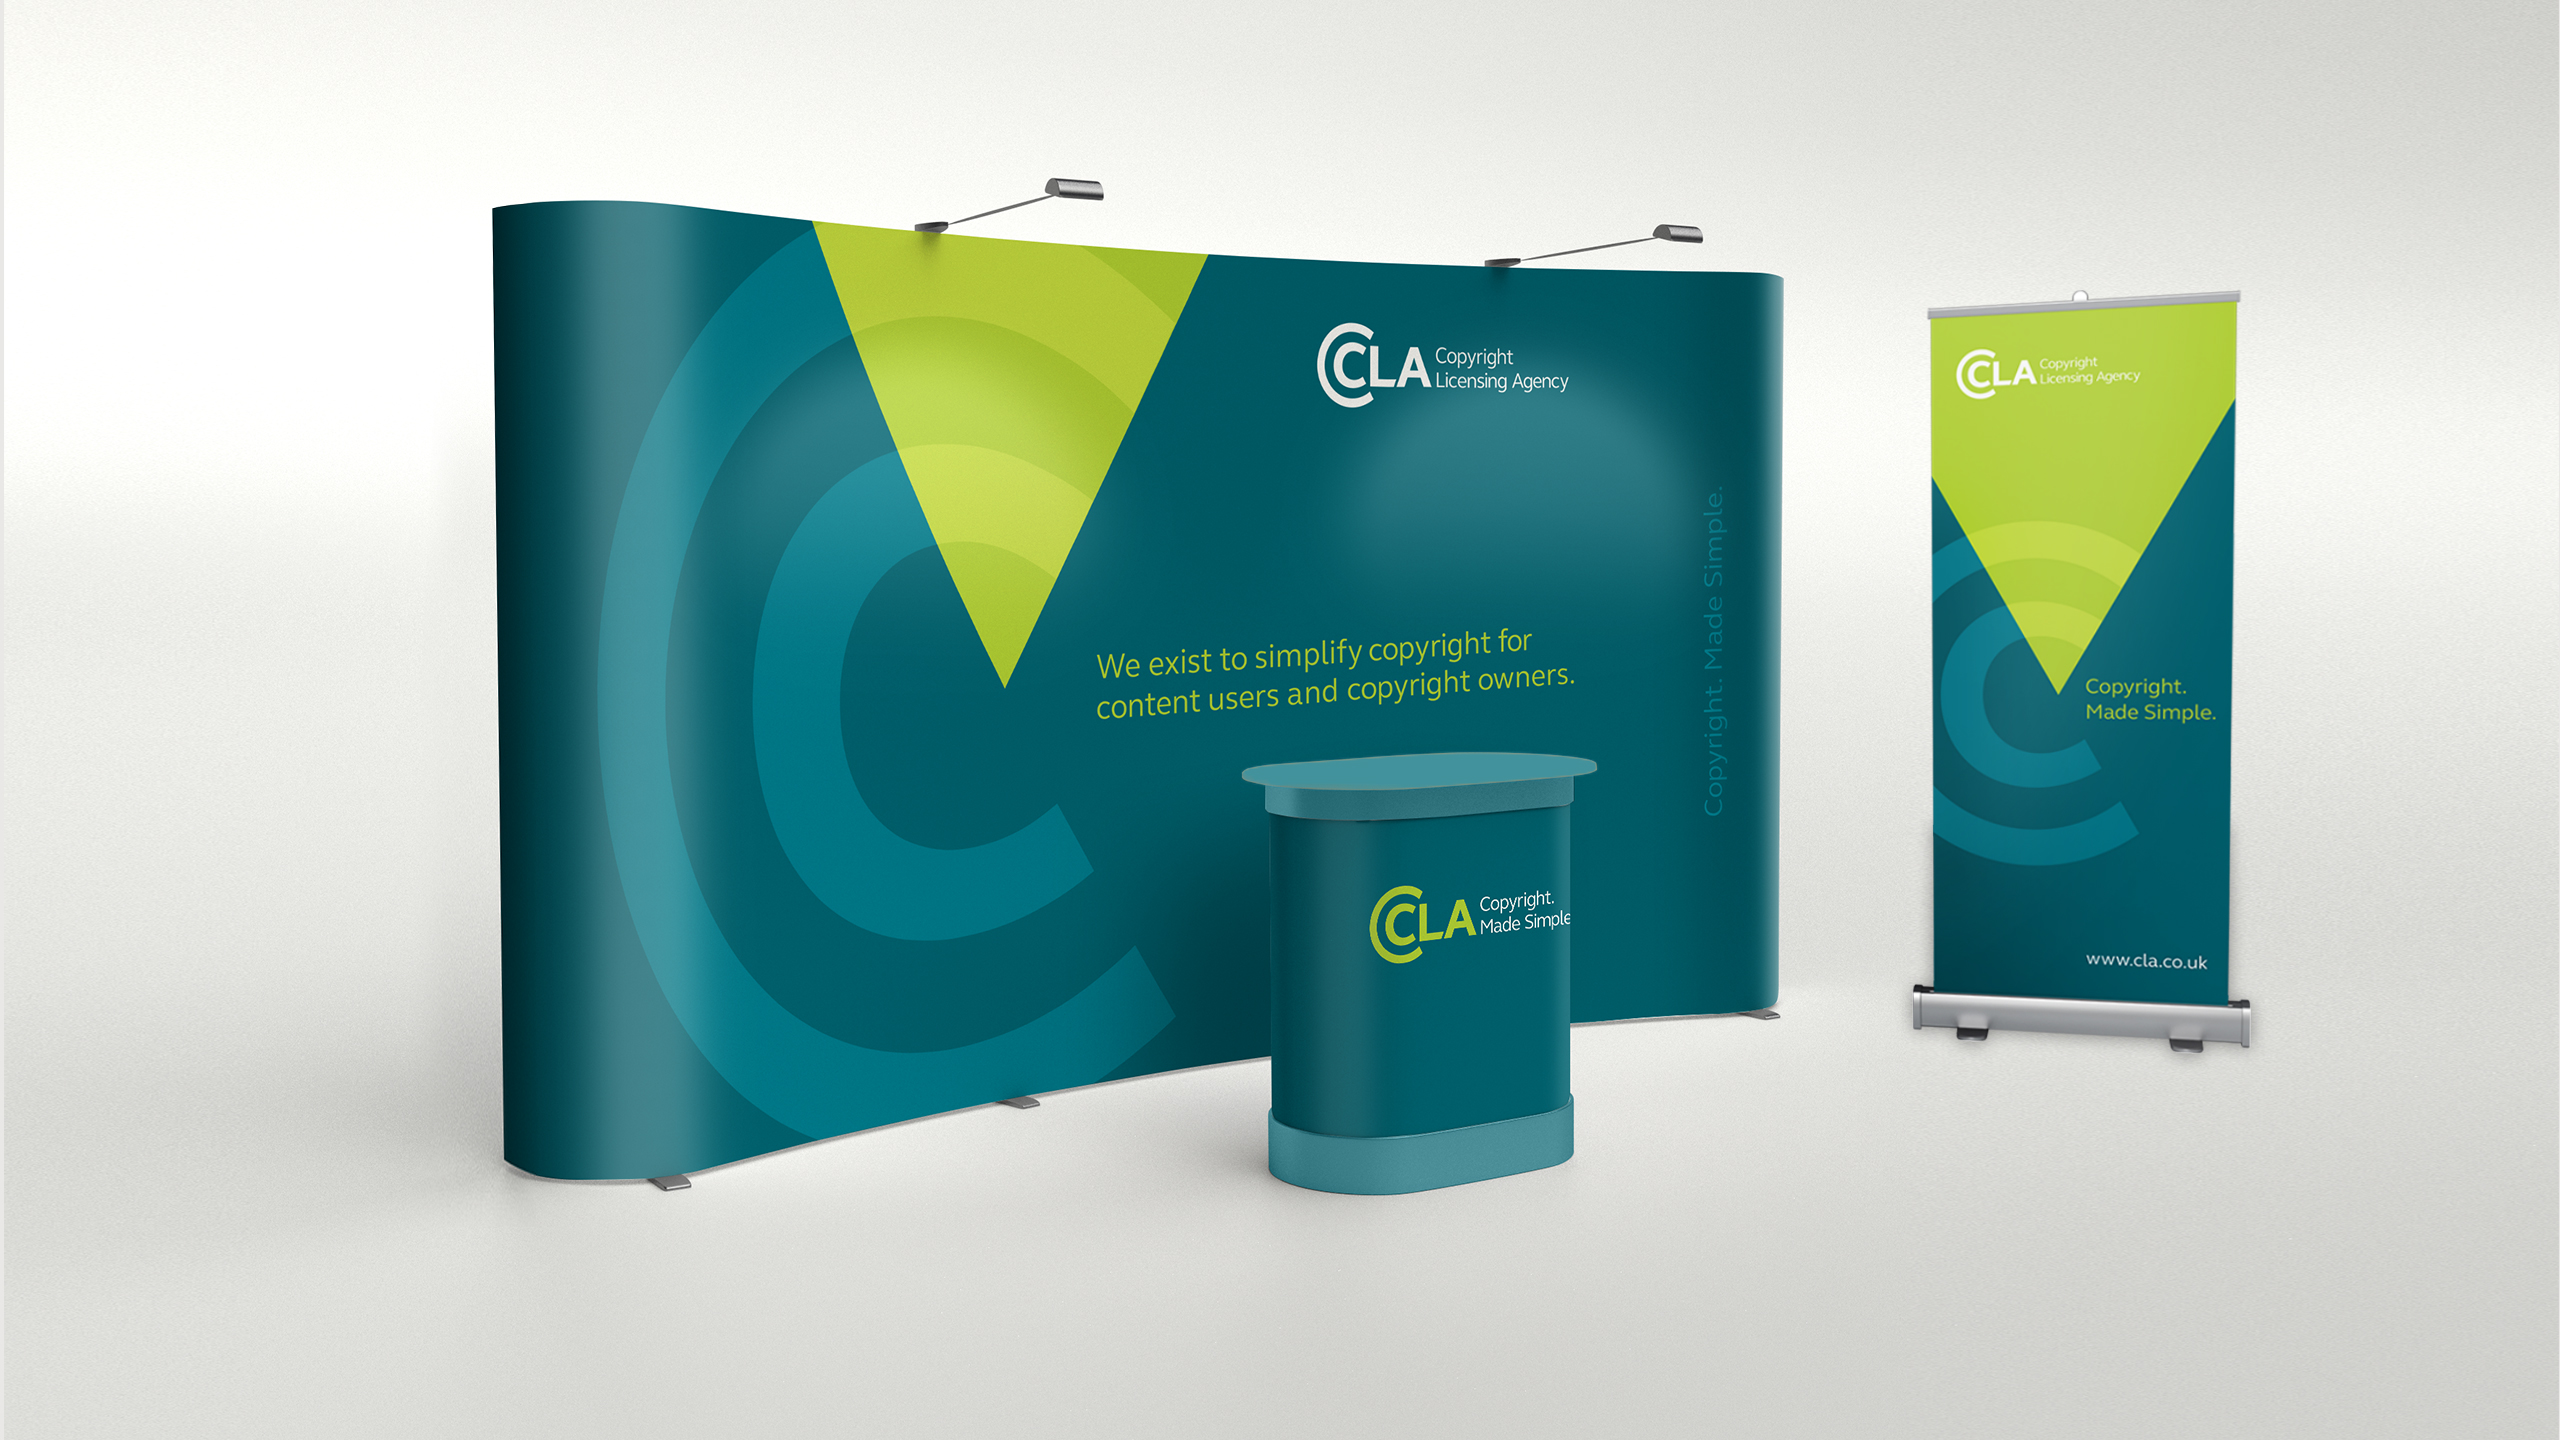 CLA Exhibition Stand & Pop-up Display